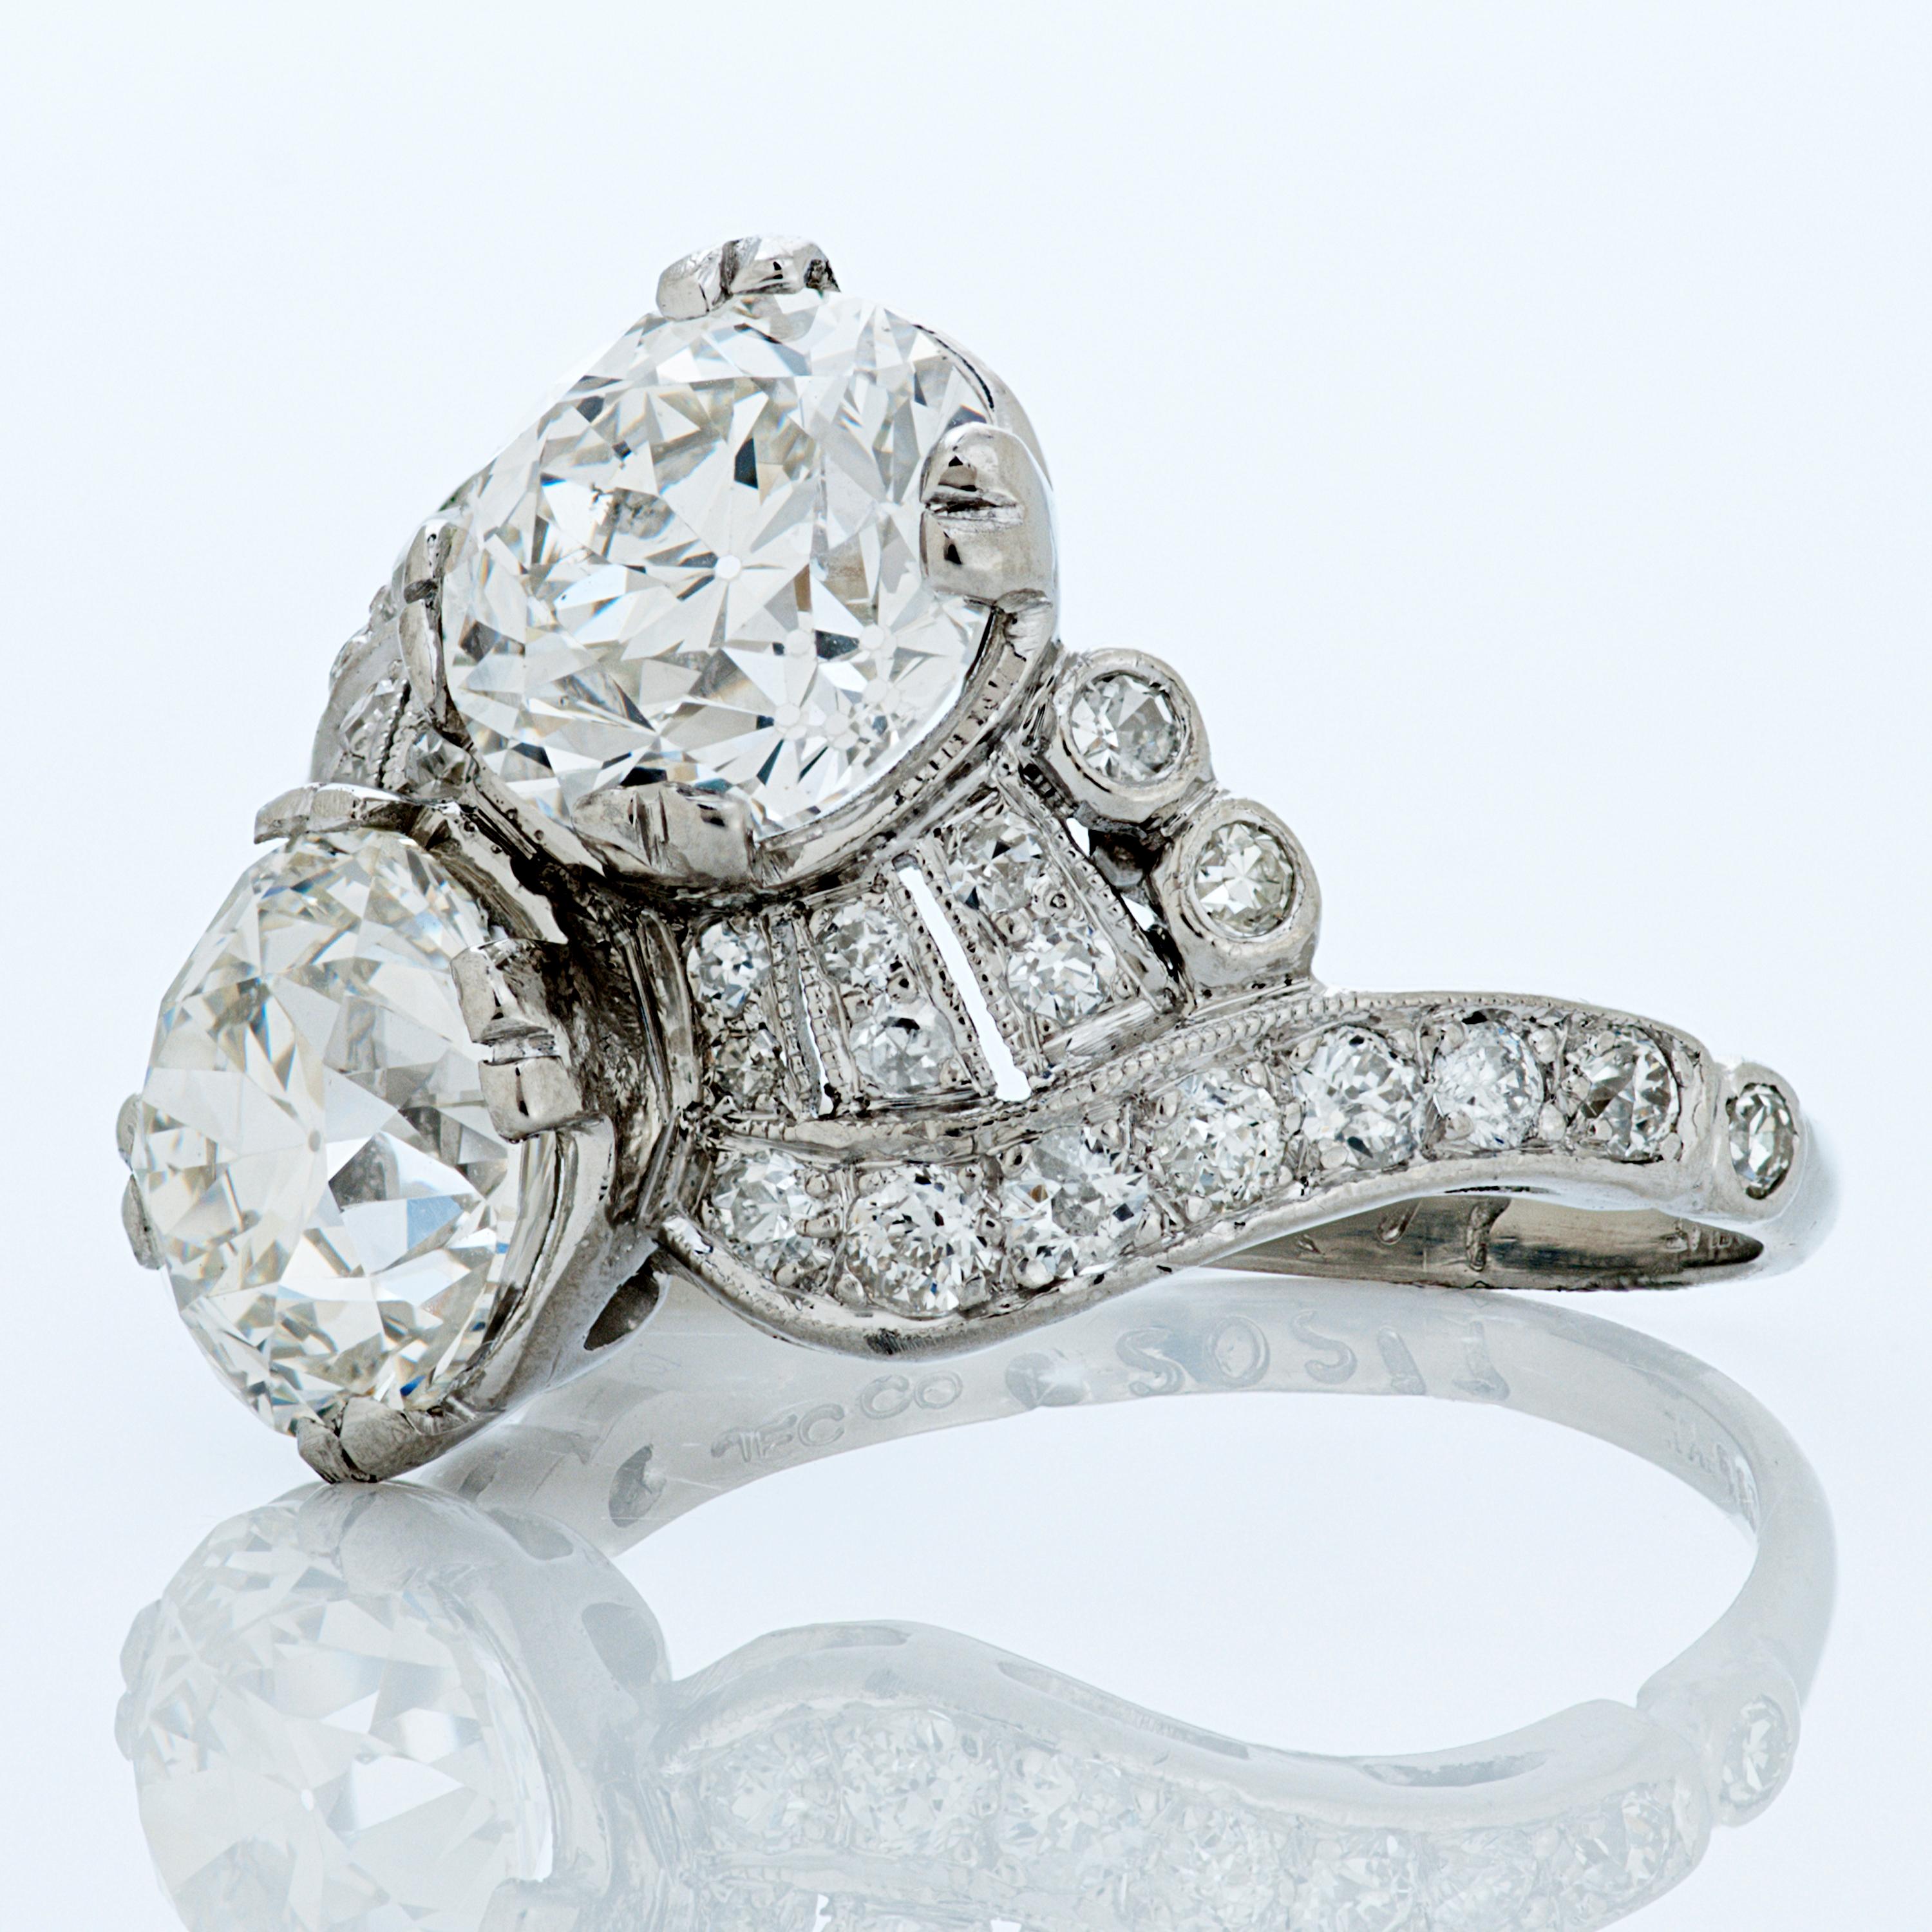 J.E. Caldwell & Co. Art Deco Old European cut diamond twin bypass ring set in platinum.

The centerpieces of this ring are two Old European cut diamonds both accompanied by GIA reports.  One weighs 2.10 carats with I color and VS2 clarity, the other